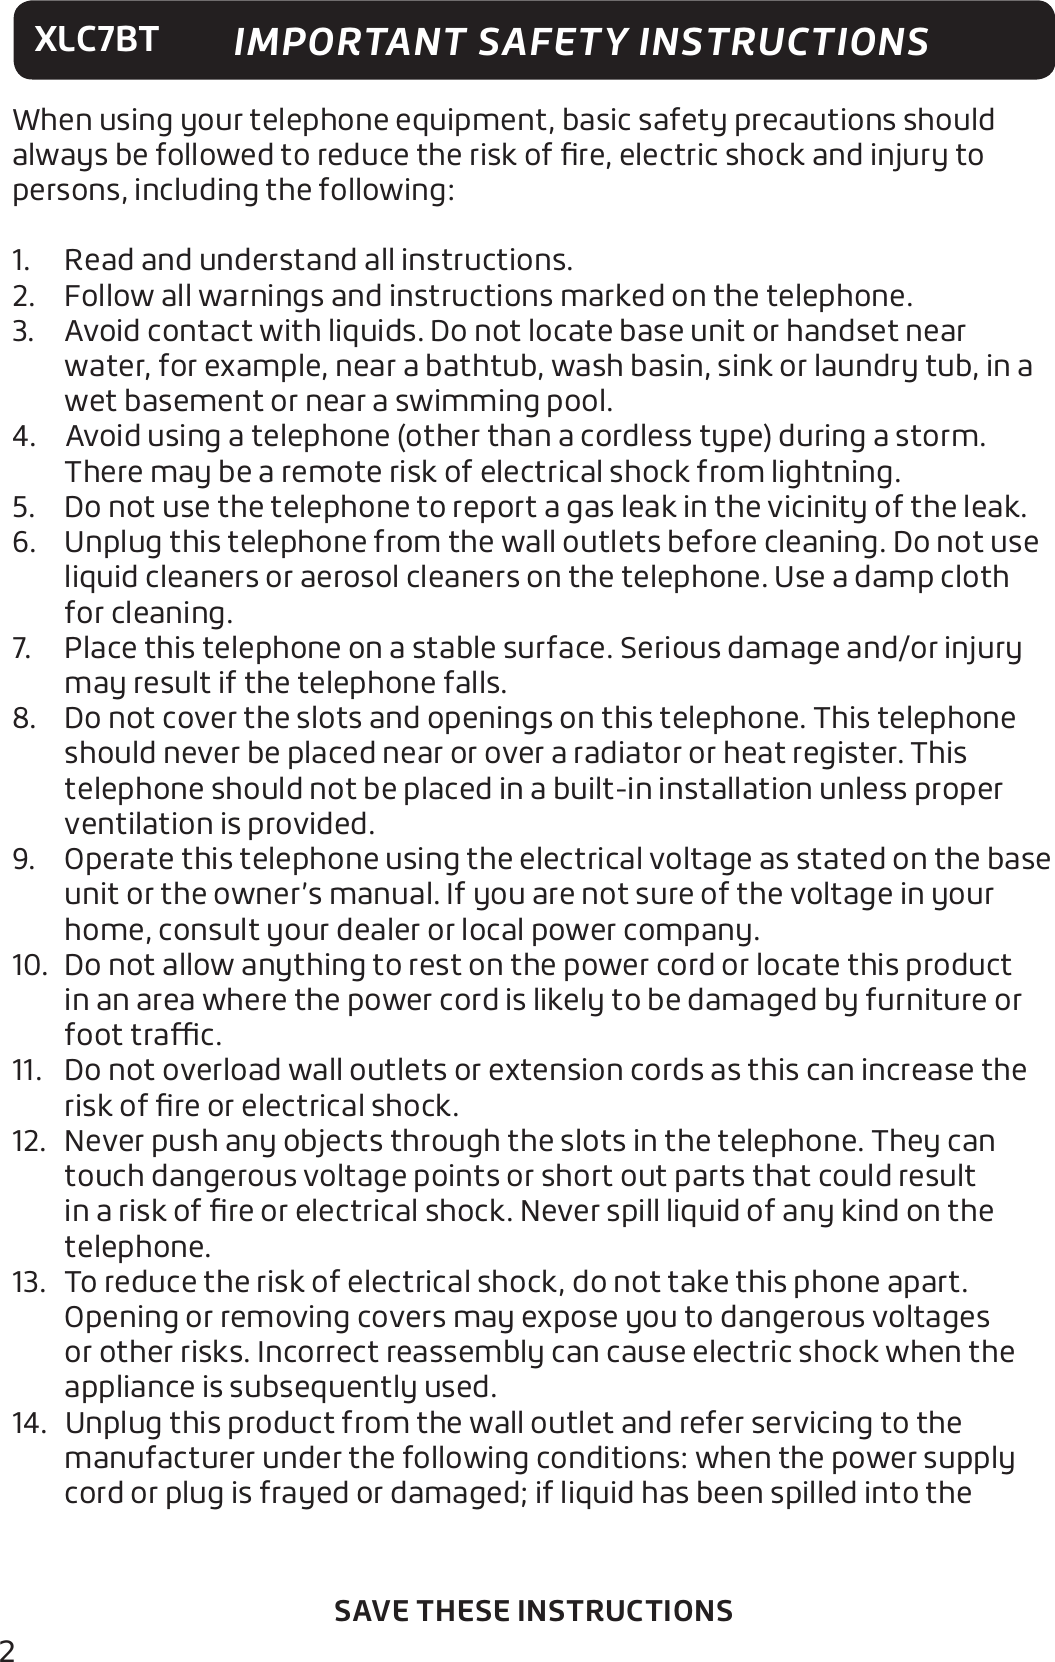 2XLC7BTSAVE THESE INSTRUCTIONSWhen using your telephone equipment, basic safety precautions should always be followed to reduce the risk of ﬁre, electric shock and injury to persons, including the following:1.  Read and understand all instructions.2.  Follow all warnings and instructions marked on the telephone.3.  Avoid contact with liquids. Do not locate base unit or handset near water, for example, near a bathtub, wash basin, sink or laundry tub, in a wet basement or near a swimming pool.4.  Avoid using a telephone (other than a cordless type) during a storm. There may be a remote risk of electrical shock from lightning.5.  Do not use the telephone to report a gas leak in the vicinity of the leak.6.  Unplug this telephone from the wall outlets before cleaning. Do not use liquid cleaners or aerosol cleaners on the telephone. Use a damp cloth for cleaning.7.  Place this telephone on a stable surface. Serious damage and/or injury may result if the telephone falls.8.  Do not cover the slots and openings on this telephone. This telephone should never be placed near or over a radiator or heat register. This telephone should not be placed in a built-in installation unless proper ventilation is provided.9.  Operate this telephone using the electrical voltage as stated on the base unit or the owner’s manual. If you are not sure of the voltage in your home, consult your dealer or local power company.10.  Do not allow anything to rest on the power cord or locate this product in an area where the power cord is likely to be damaged by furniture or foot trac.11.  Do not overload wall outlets or extension cords as this can increase the risk of ﬁre or electrical shock.12.  Never push any objects through the slots in the telephone. They can touch dangerous voltage points or short out parts that could result in a risk of ﬁre or electrical shock. Never spill liquid of any kind on the telephone.13.  To reduce the risk of electrical shock, do not take this phone apart. Opening or removing covers may expose you to dangerous voltages or other risks. Incorrect reassembly can cause electric shock when the appliance is subsequently used.14.  Unplug this product from the wall outlet and refer servicing to the manufacturer under the following conditions: when the power supply cord or plug is frayed or damaged; if liquid has been spilled into the IMPORTANT SAFETY INSTRUCTIONS